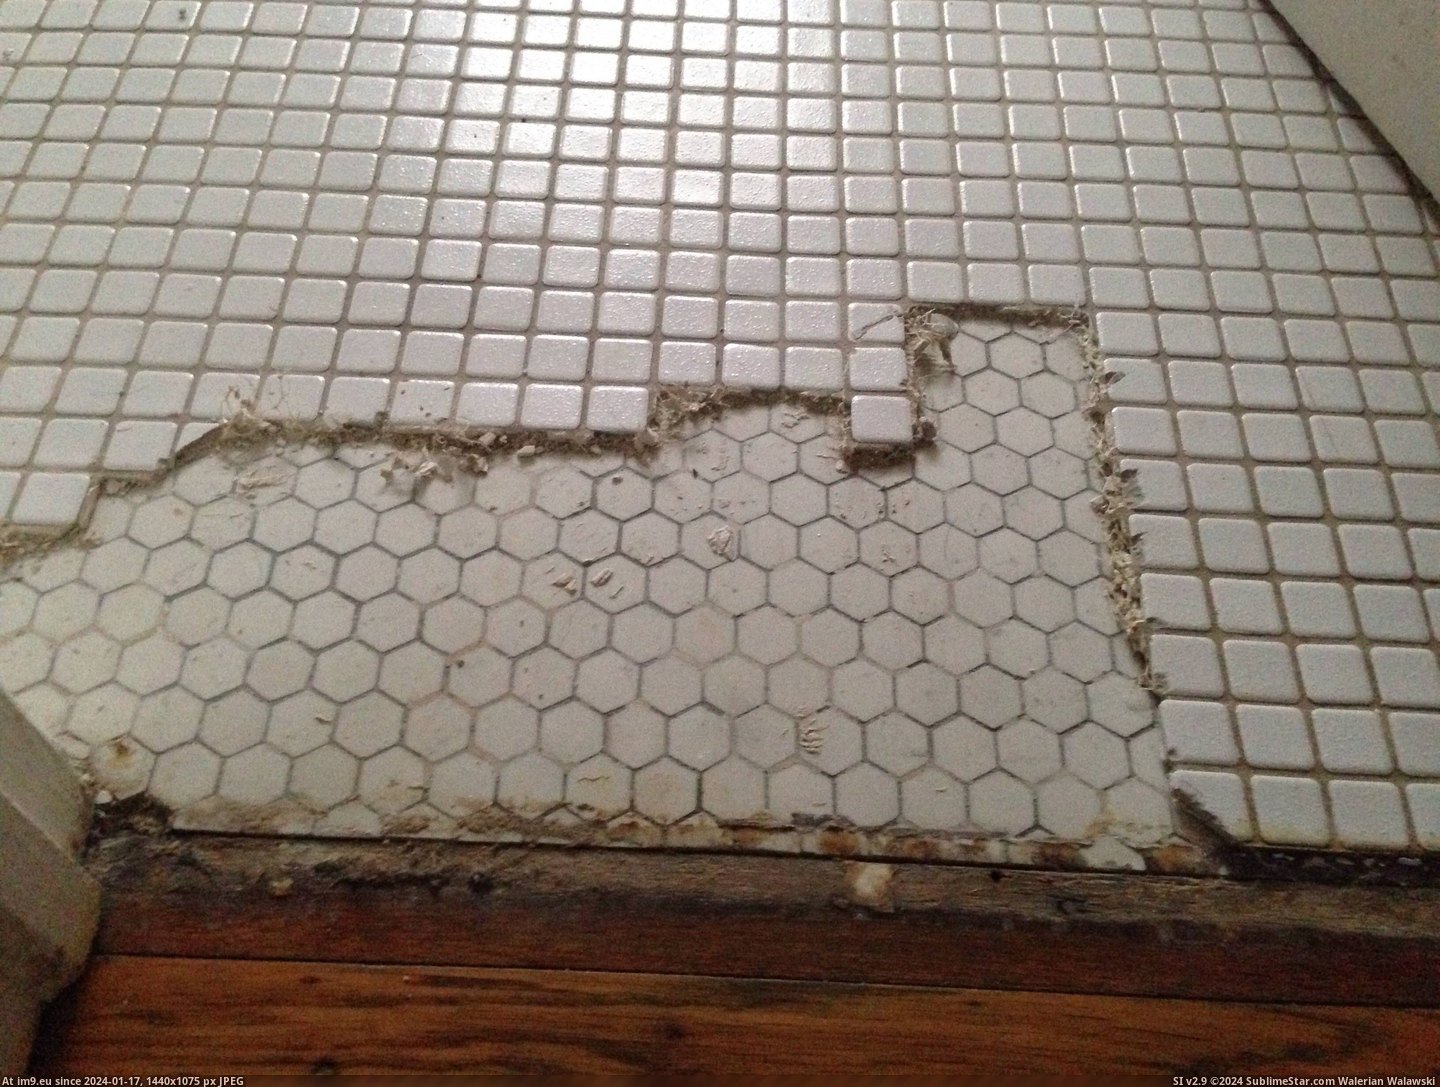 #Time #Wife #Wanted #Tile #Hexagon #Bathroom #Hour #1920s [Pics] My wife and I wanted to redo our 1920s bathroom with more time-appropriate hexagon tile. An hour in, I see this. Pic. (Obraz z album My r/PICS favs))